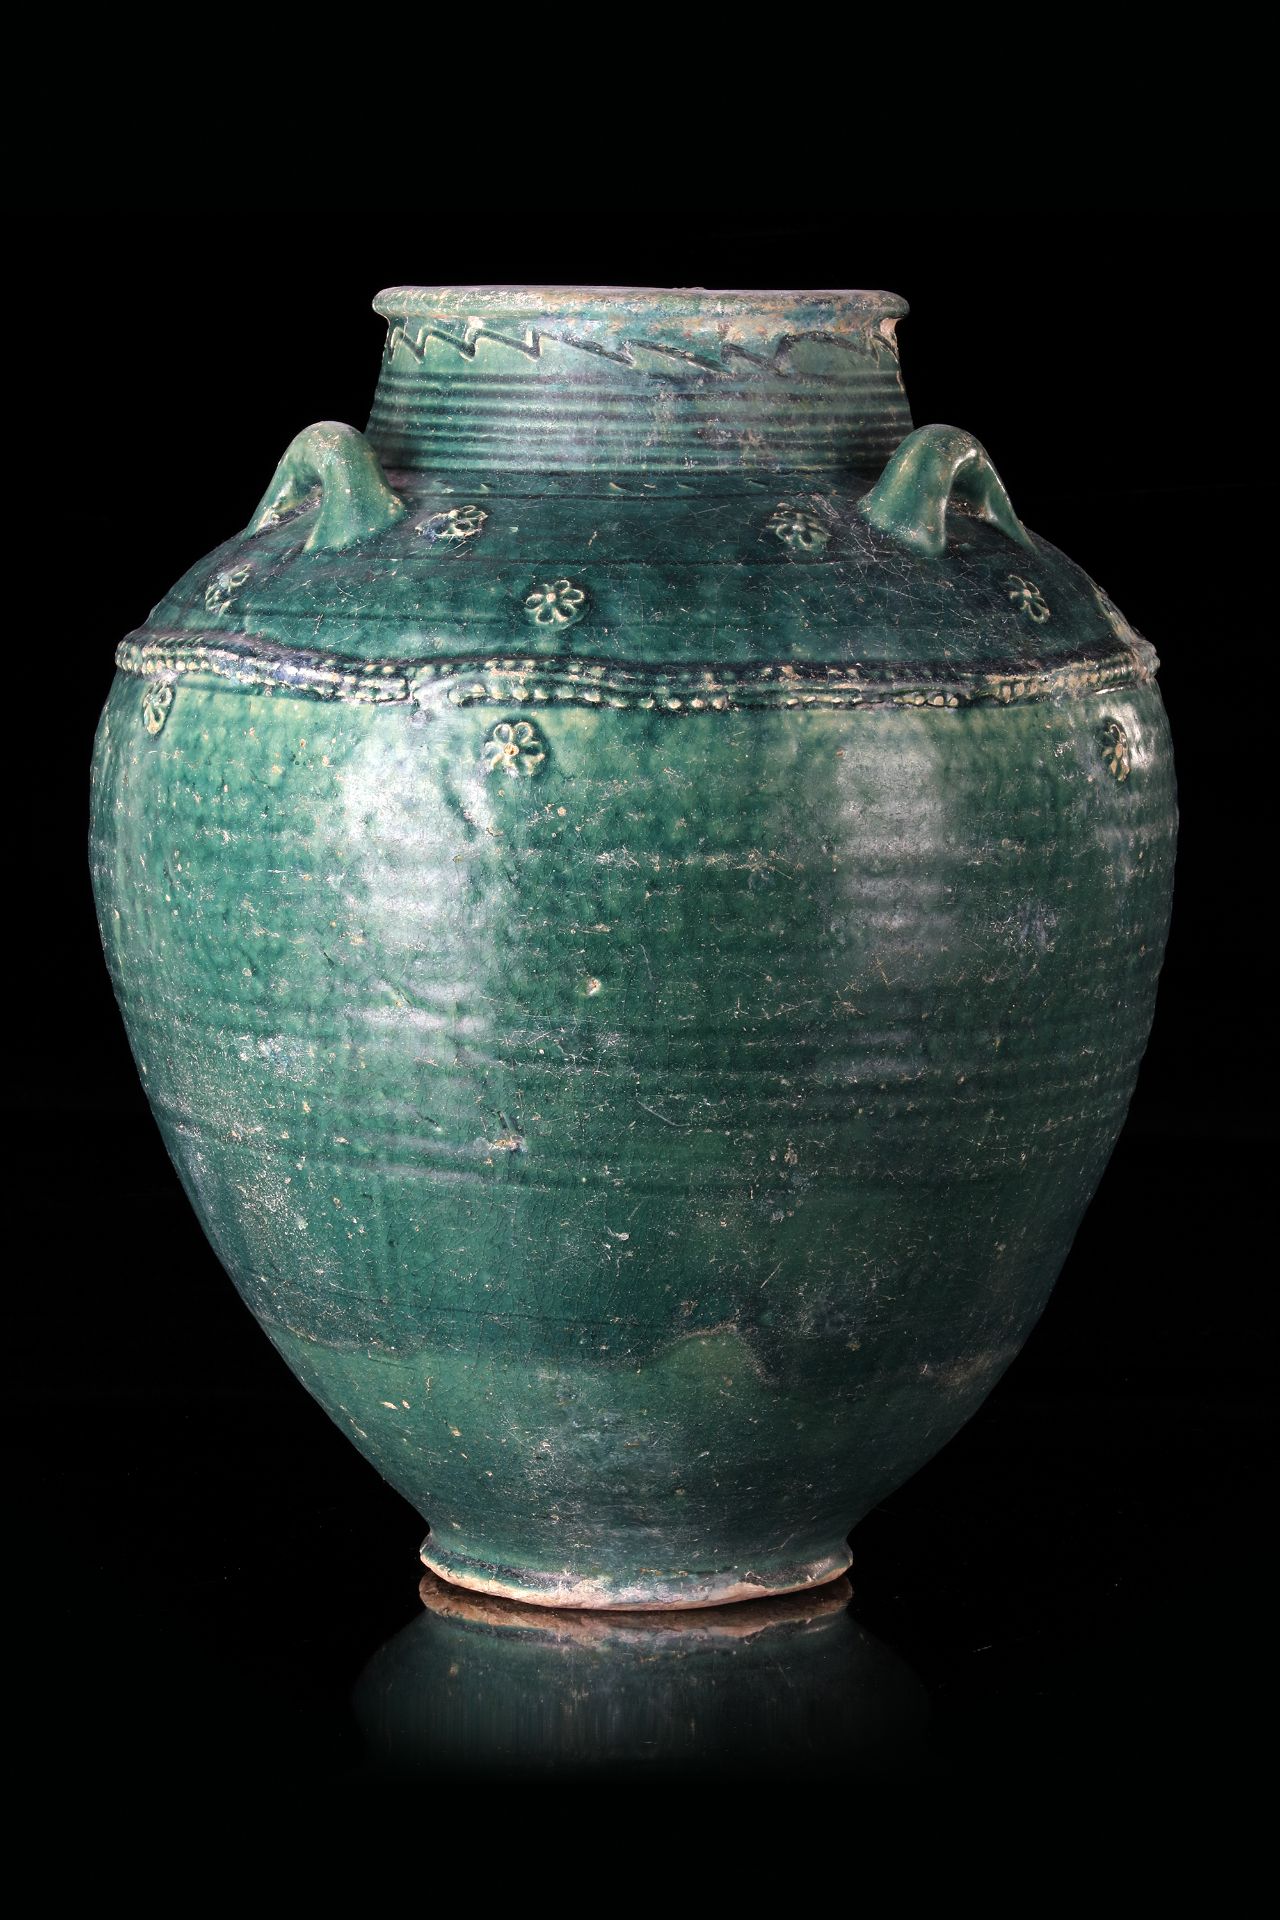 A LARGE POST SASSANIAN TURQUOISE GLAZED POTTERY STORAGE JAR, PERSIA, 6TH-8TH CENTURY - Image 2 of 6